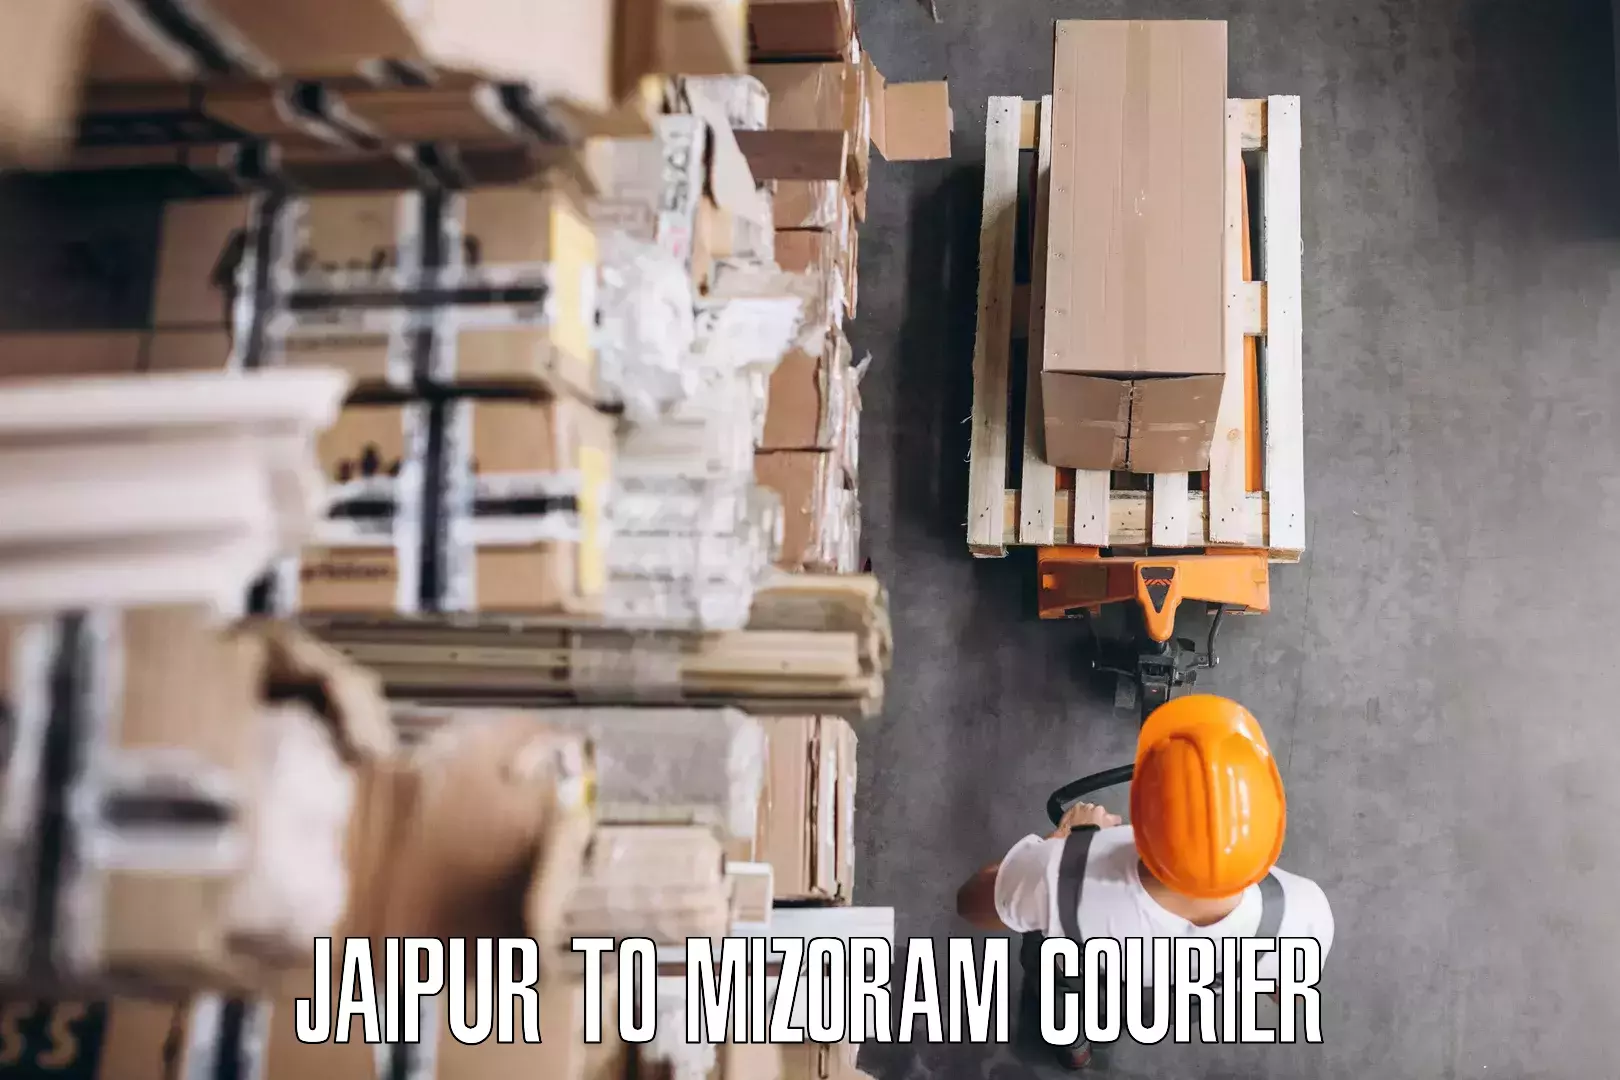 Furniture delivery service Jaipur to Aizawl